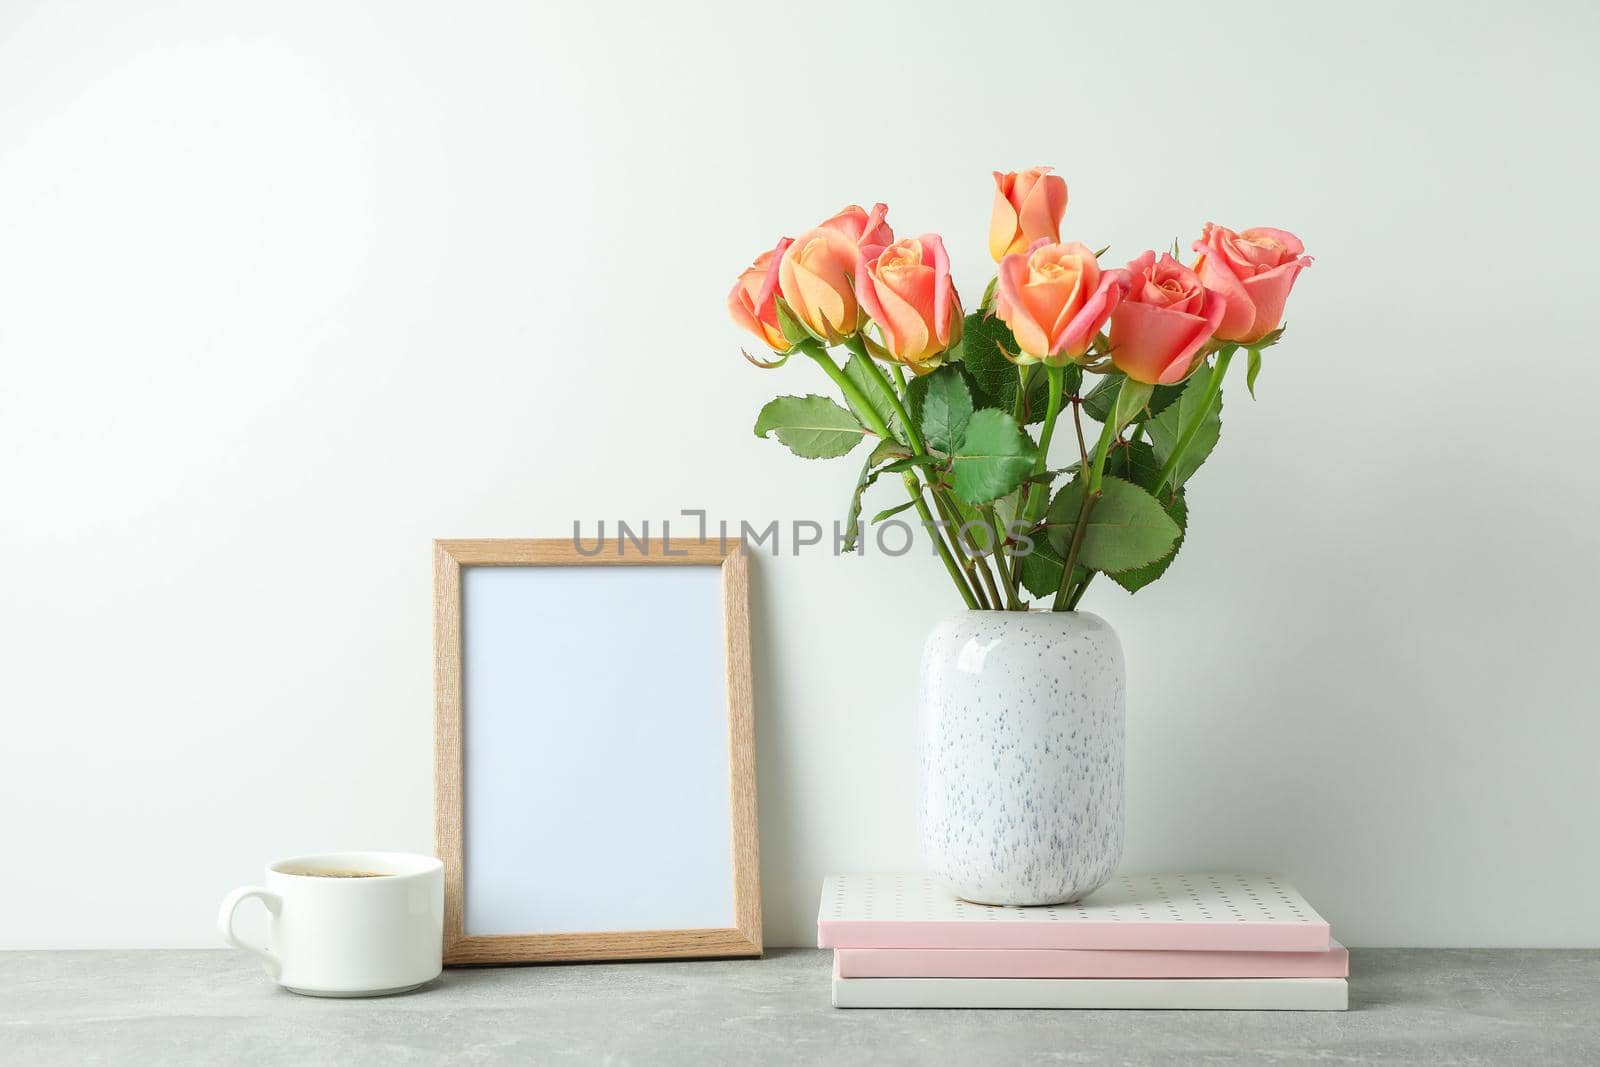 Vase with pink roses, copybooks, empty frame, cup of coffee on grey table against white background by AtlasCompany